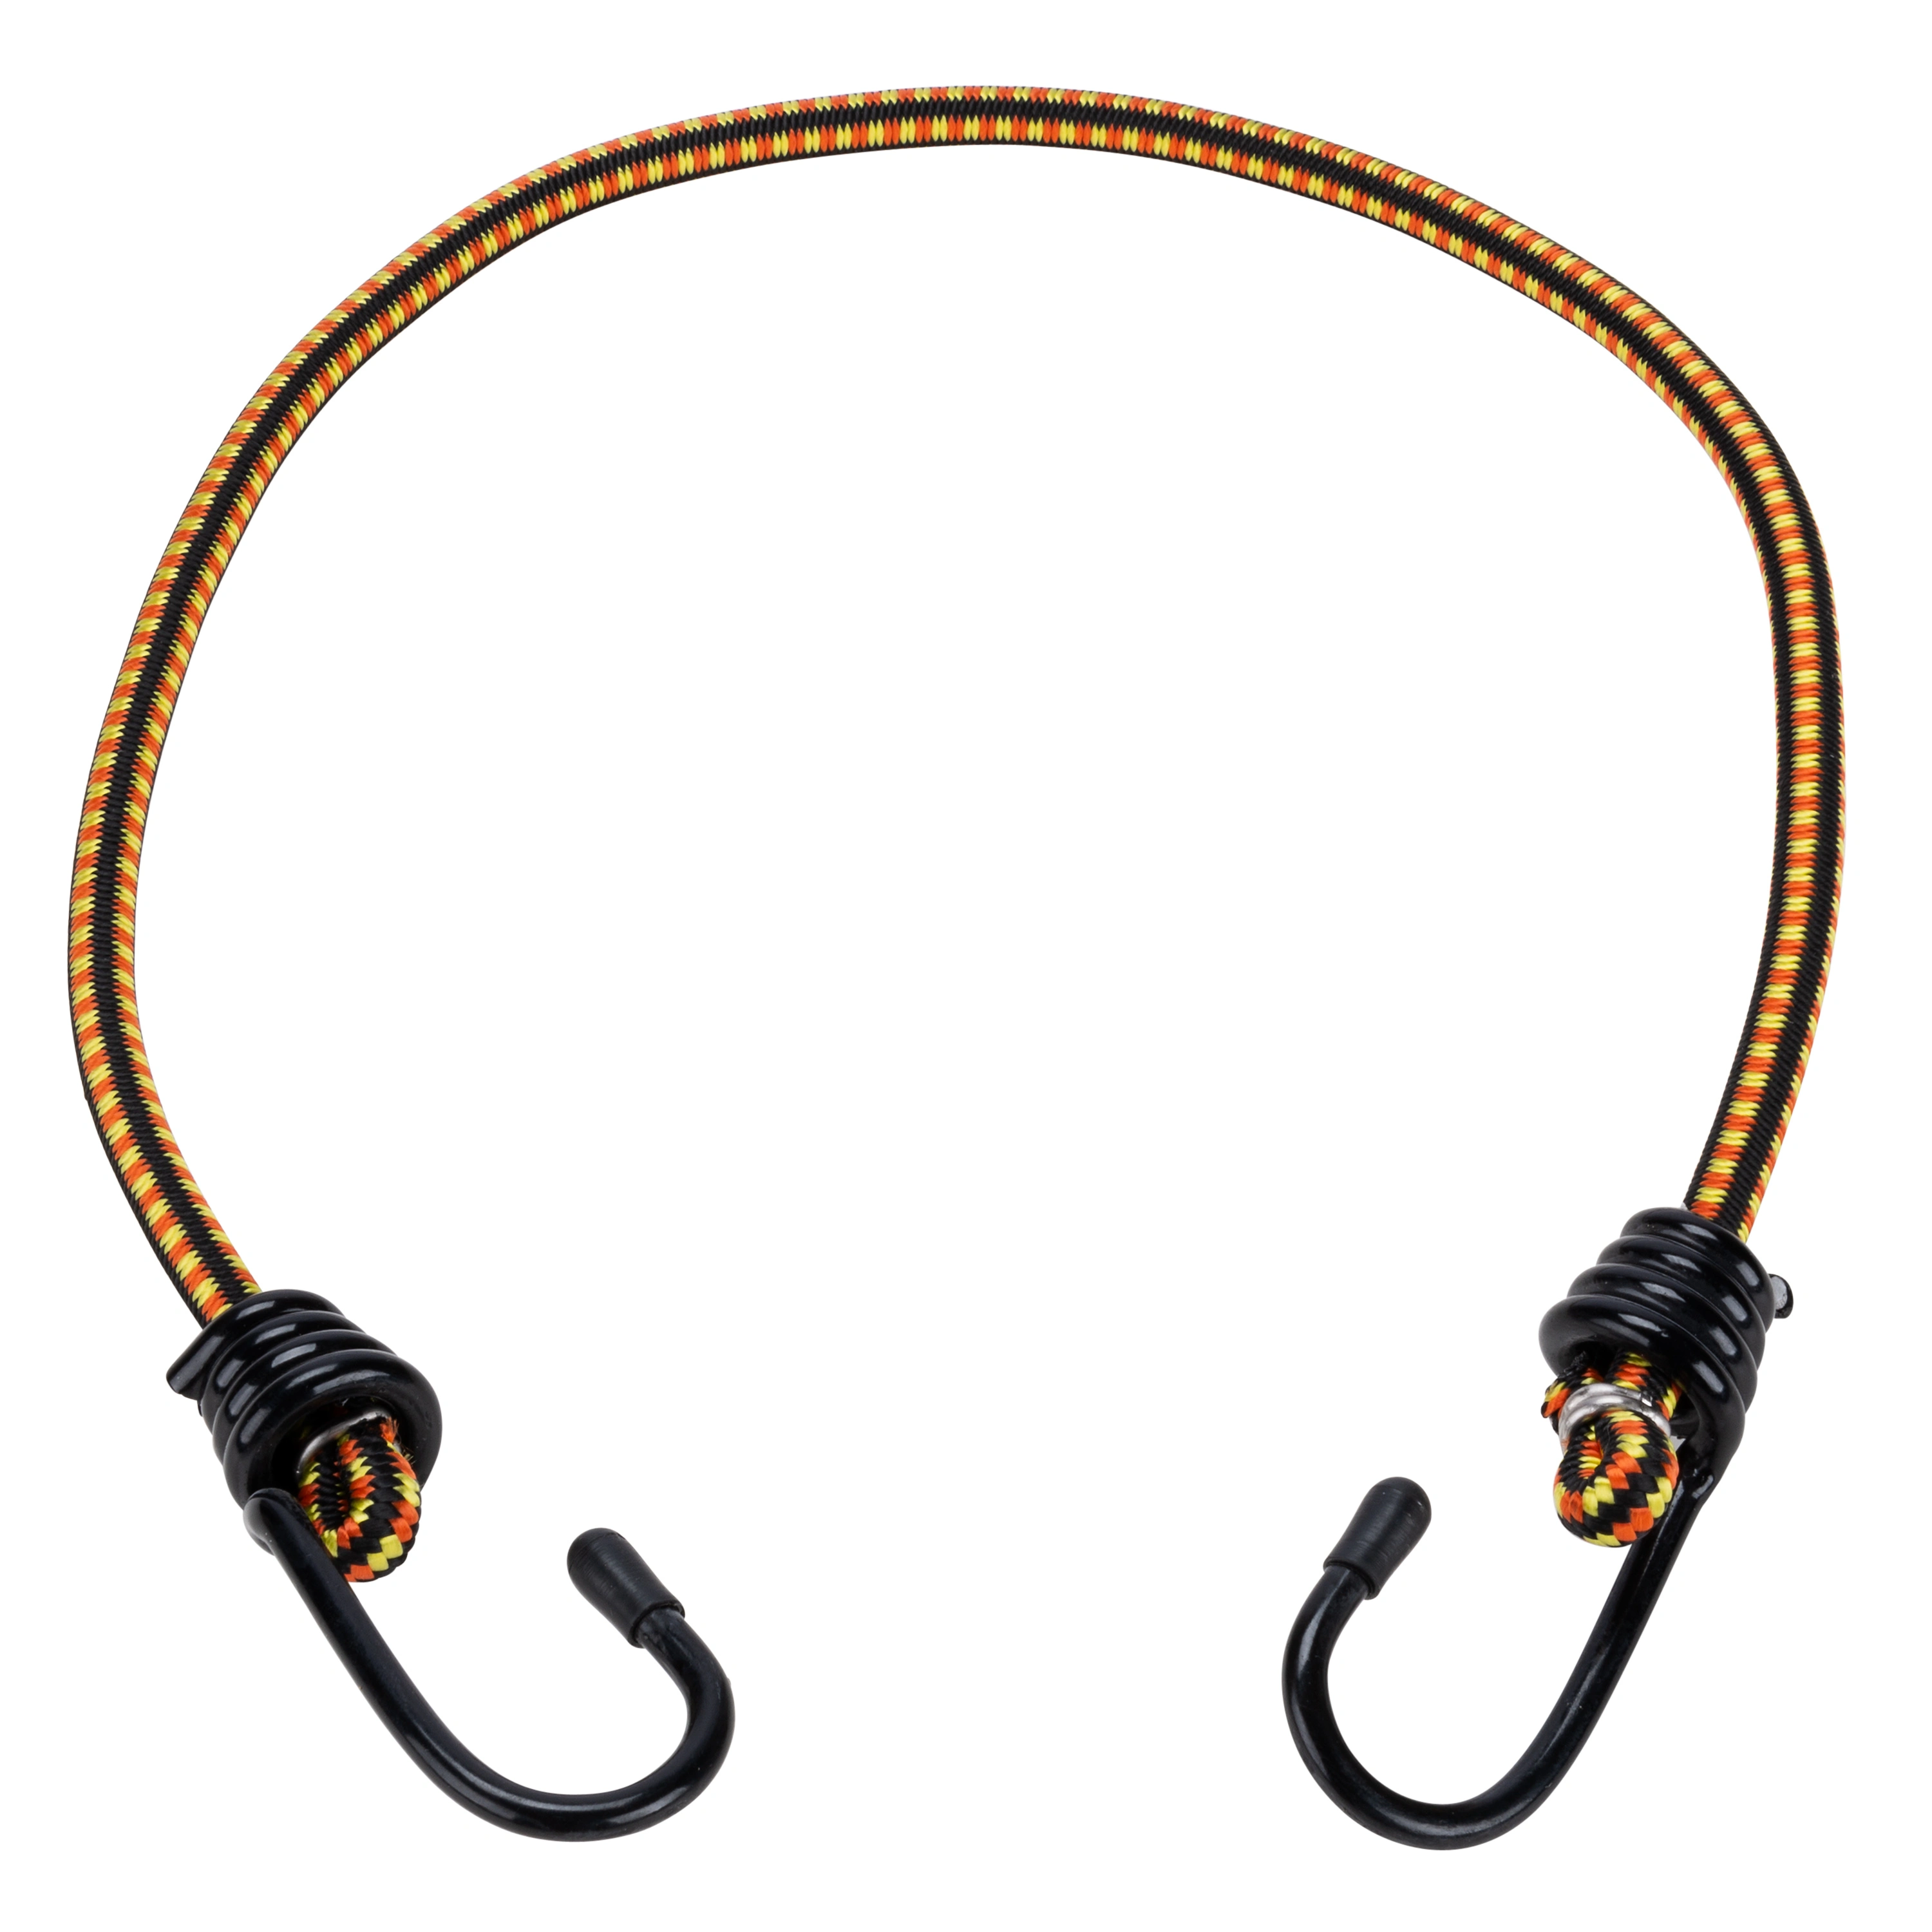 24" Bungee Cord, 3 Pack variant image view